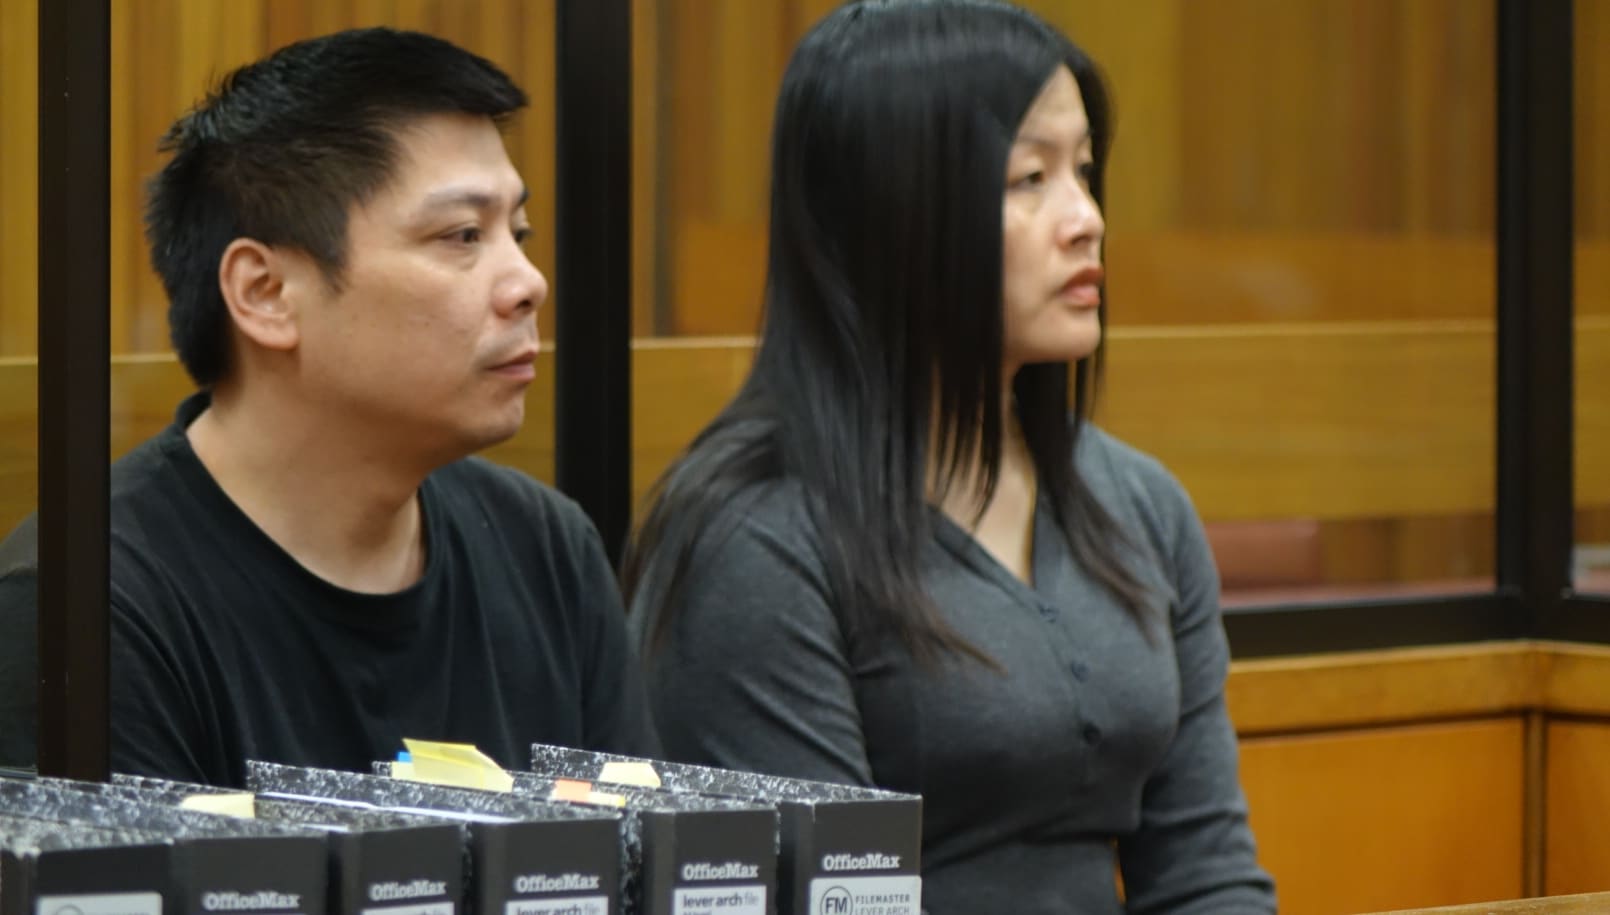 Jainbin Wang, left, and Fenglan Liu in the New Plymouth District Court